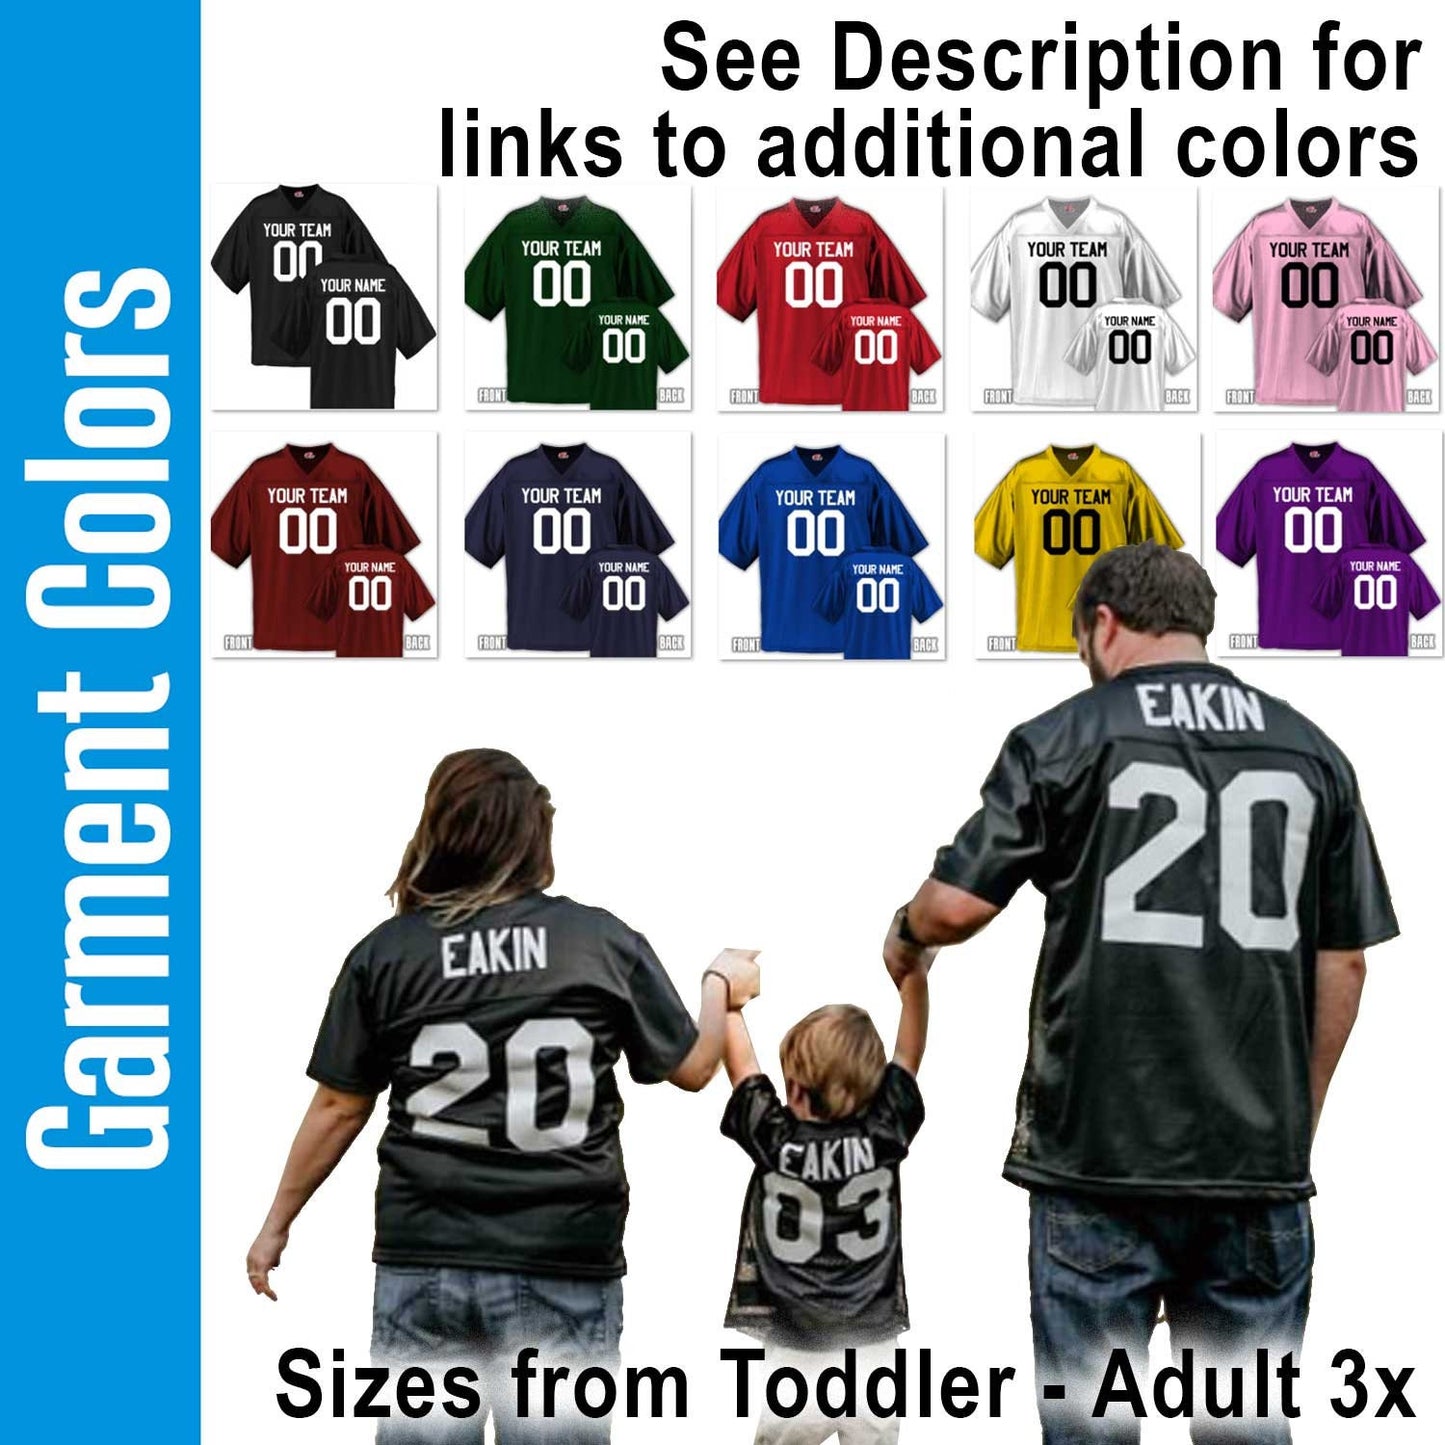 Customized Maroon Football Jersey with Your Name and Number Printed on Front and Back, No Minimums, Fast Production Printed in USA